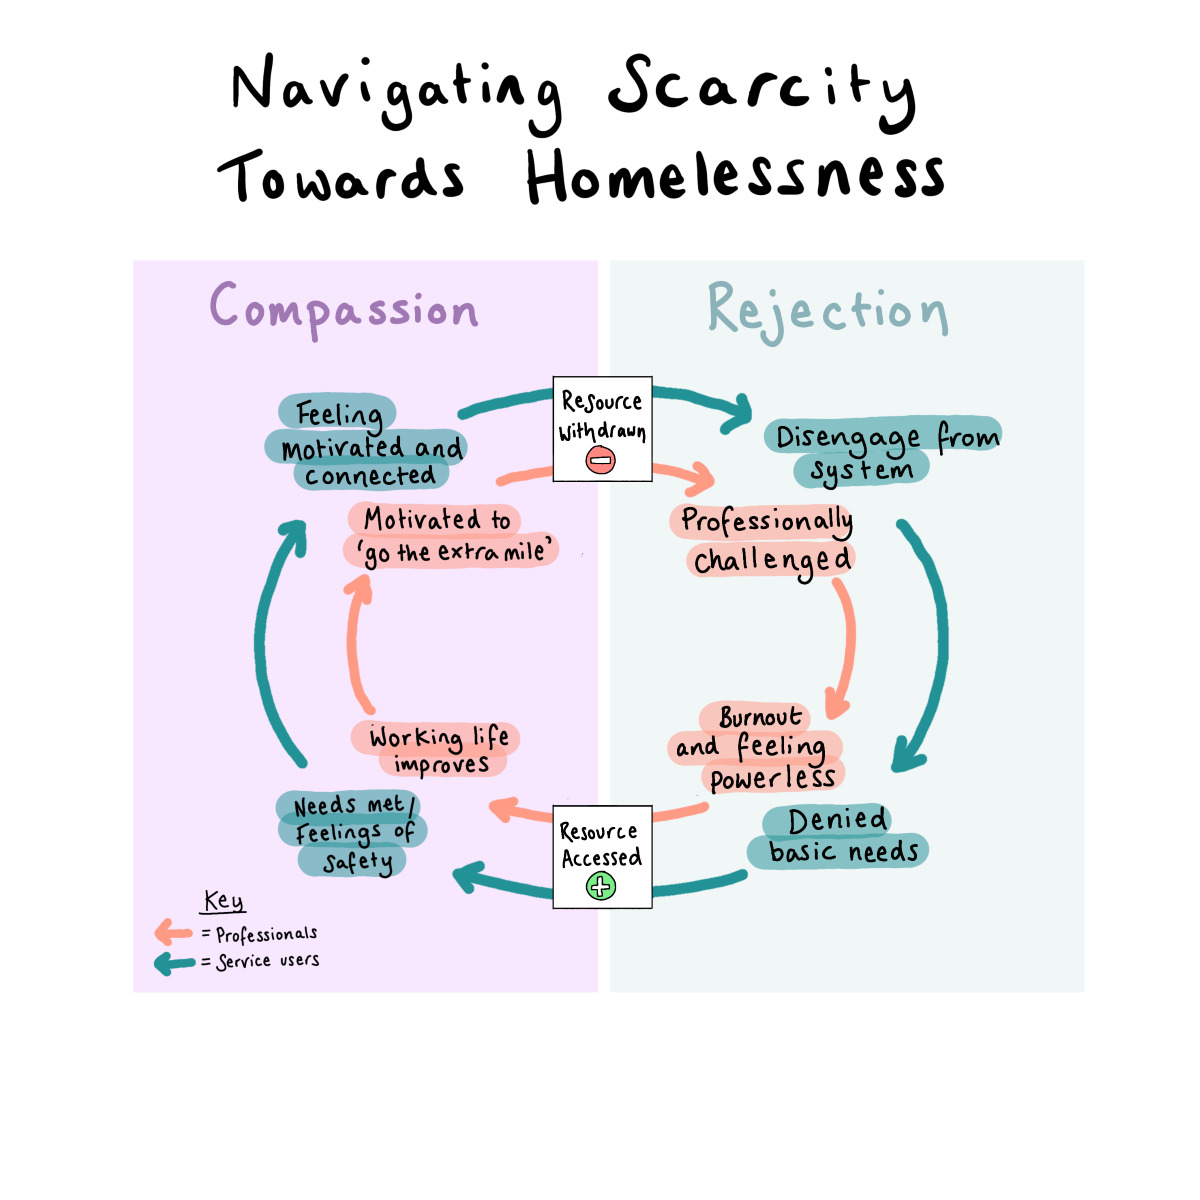 Navigating Homeless Services